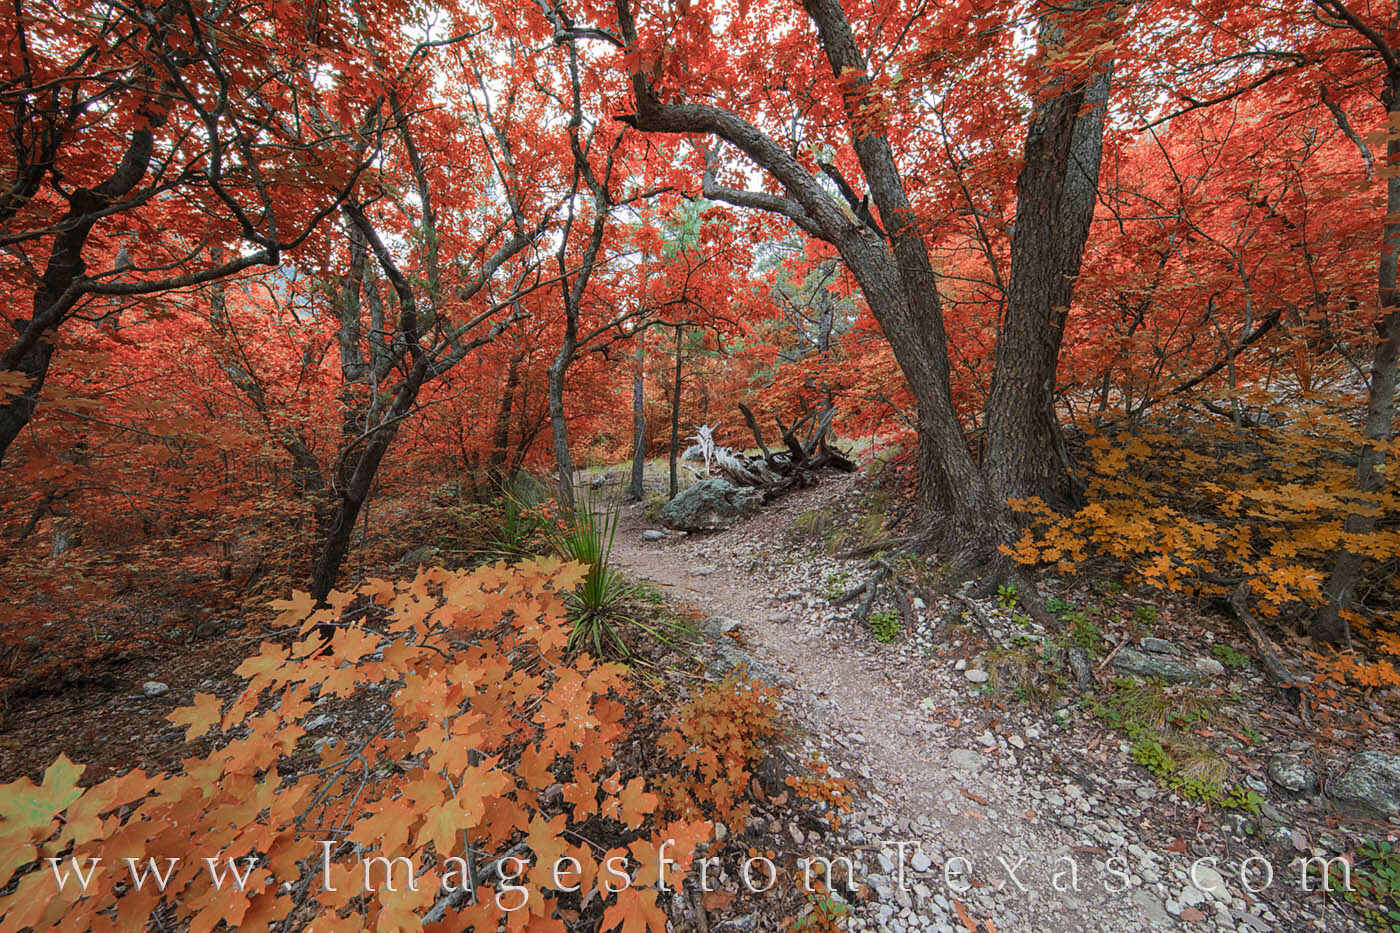 McKittrick Canyon, Guadalupe Mountains, Guadalupe Mountains National Park, Texas fall colors, Texas national parks, autumn colors, west texas, texas hiking, texas hikes